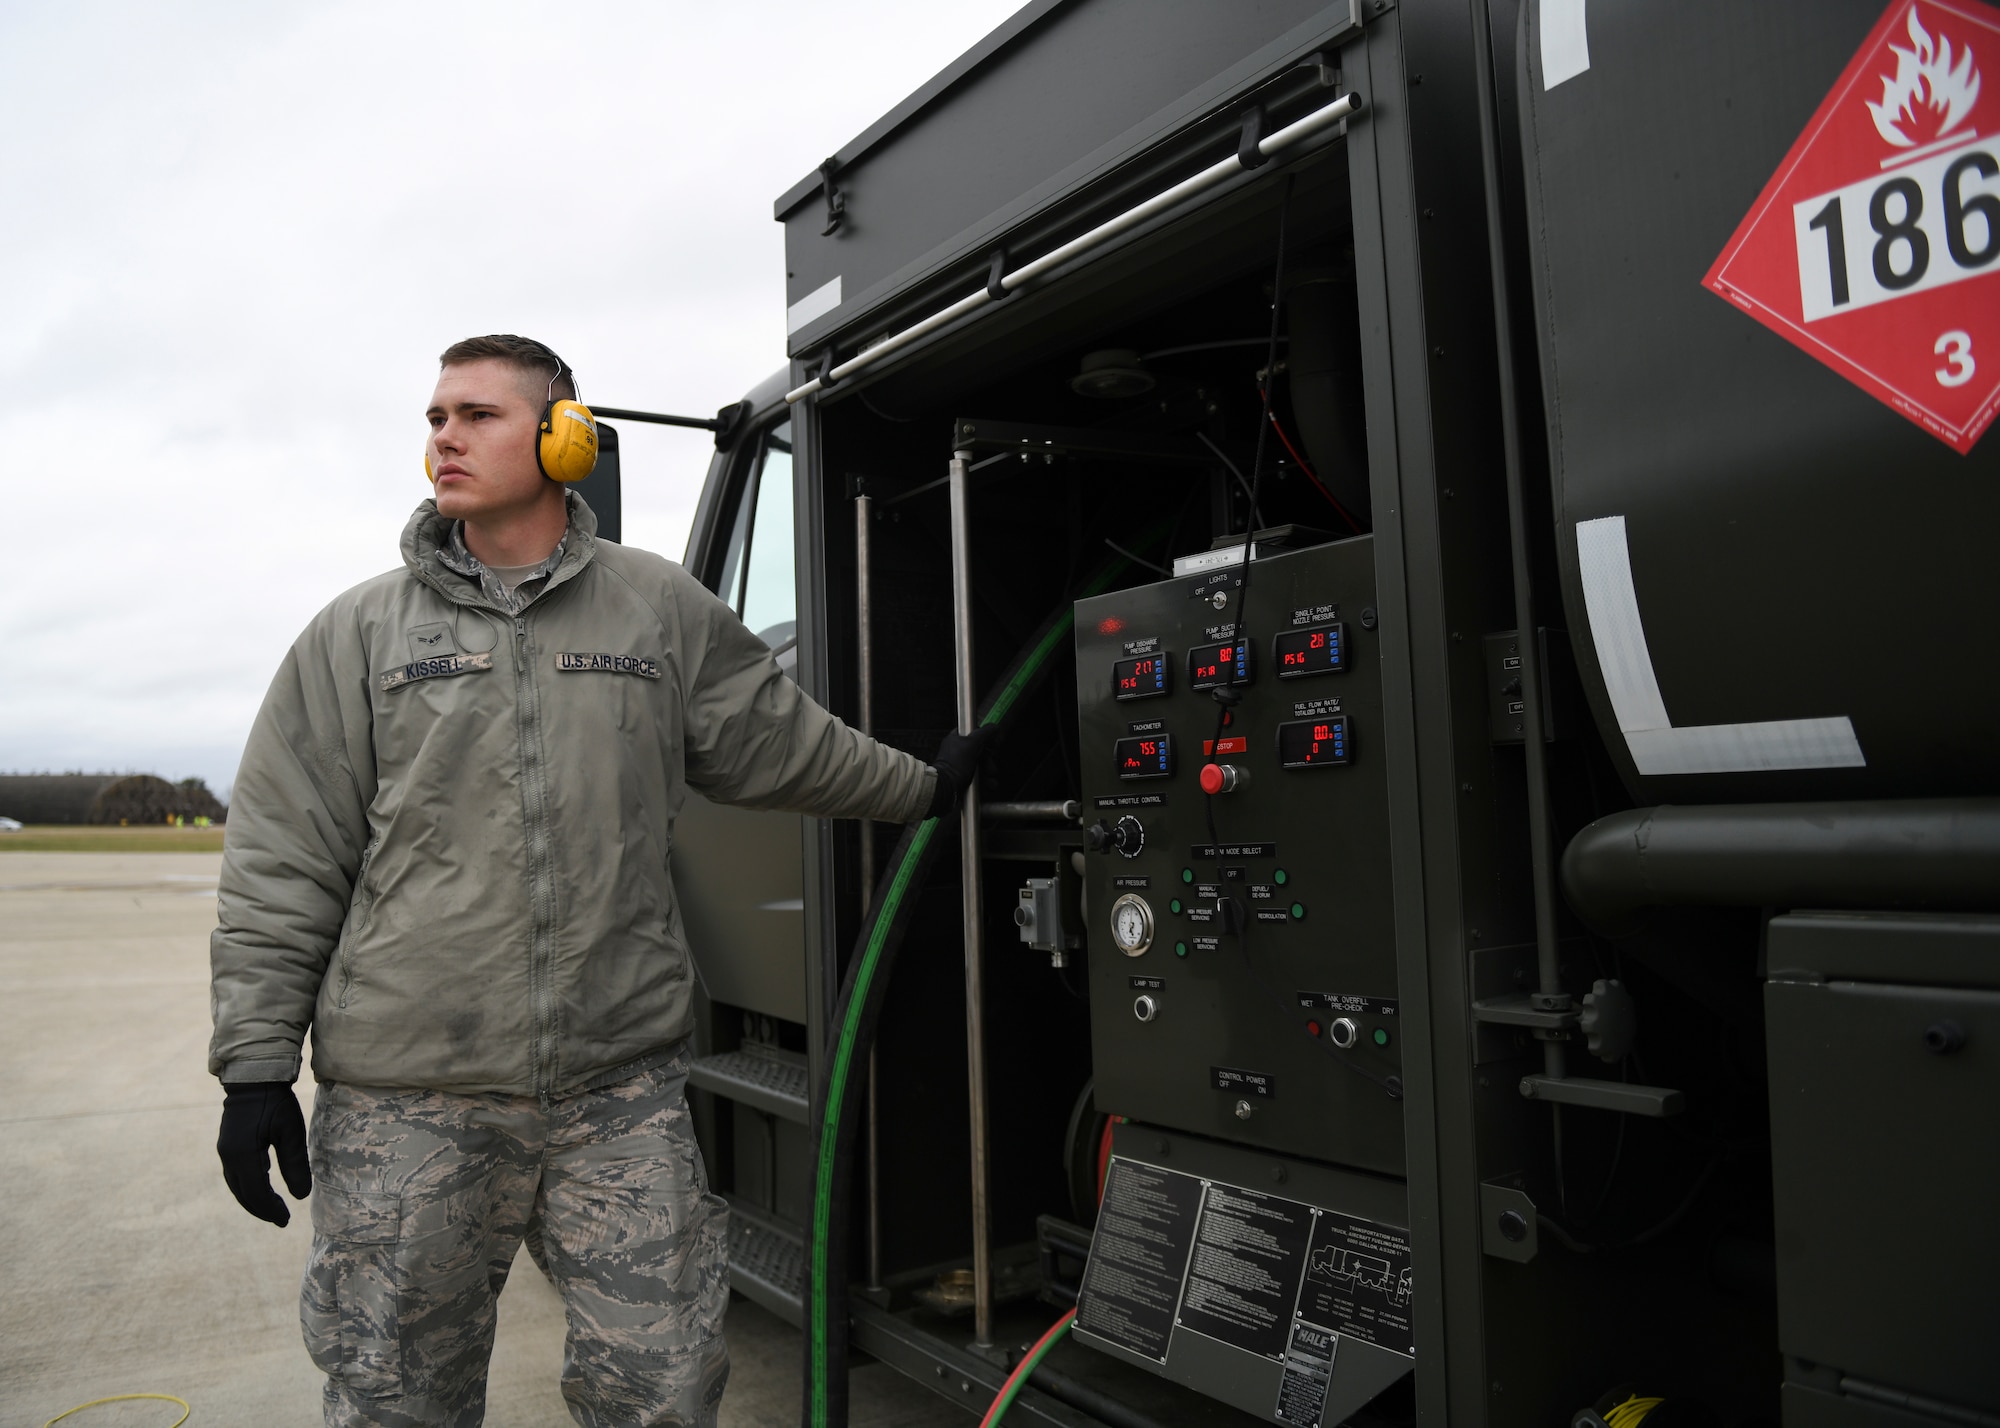 Airman 1st Class Nicholas Kissell, 48th Logistics Readiness Squadron Fuels Distribution operator, controls the flow of fuel from an Isometric R-11 Refueling Truck at Royal Air Force Lakenheath, England, March 12, 2019. The 48th Fighter Wing is the first to use these trucks operationally in the Air Force after the vehicles were introduced into testing in May 2016. (U.S. Air Force photo by Senior Airman Malcolm Mayfield)